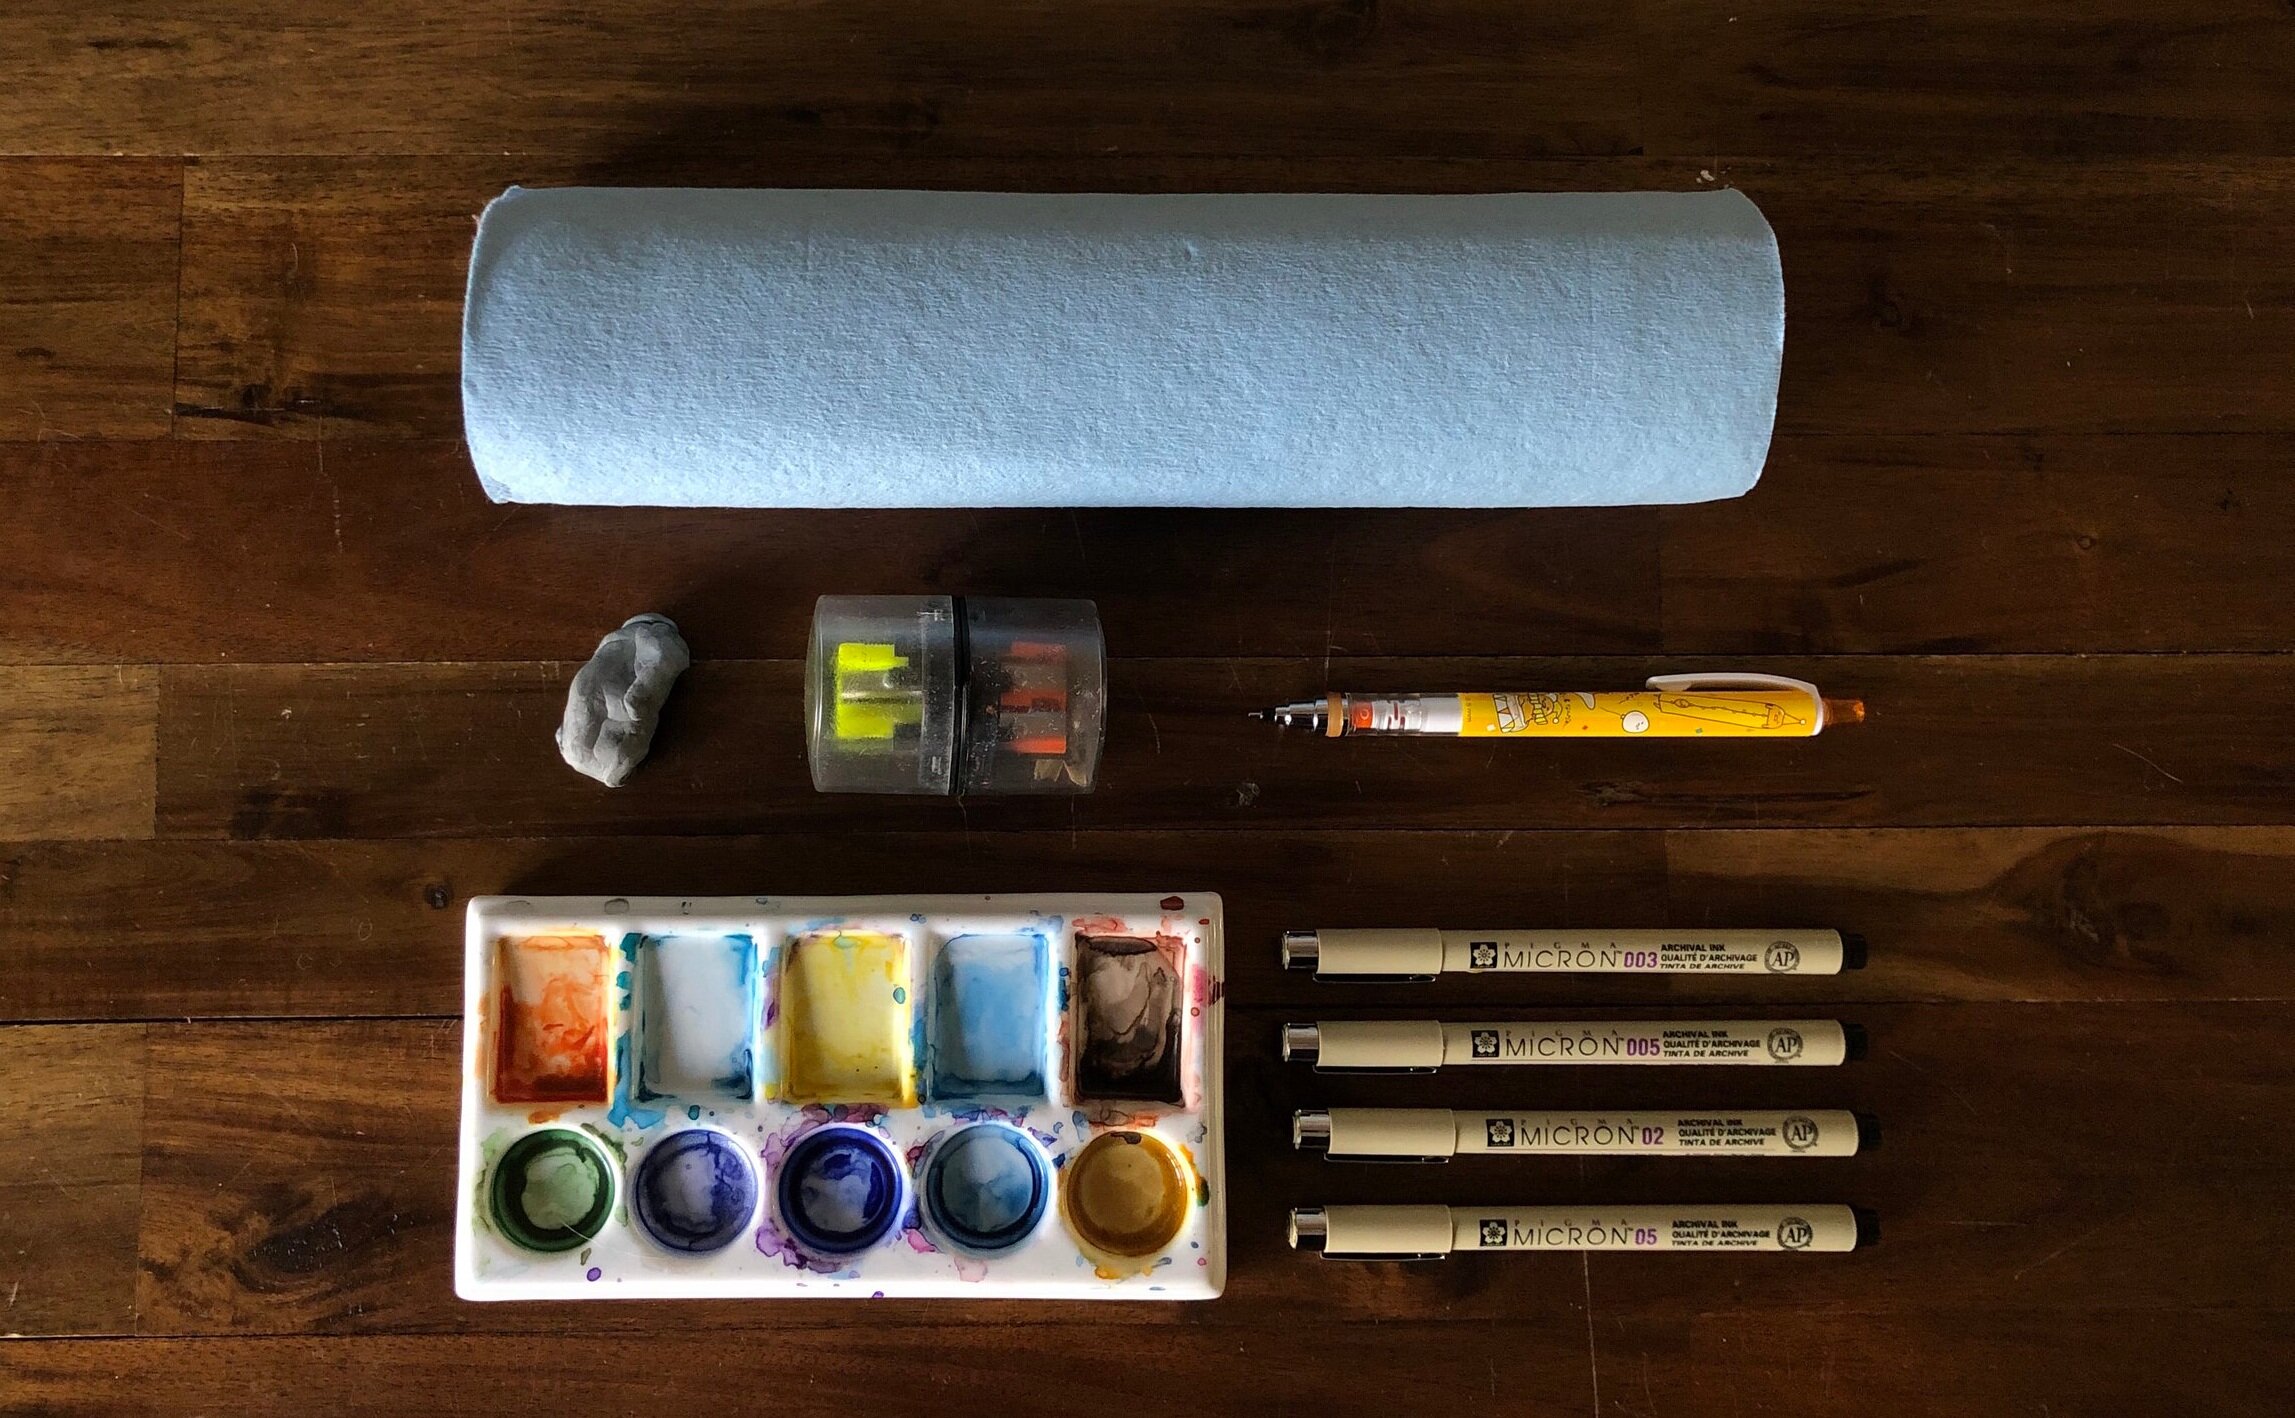 How I Organize My Watercolor Supplies